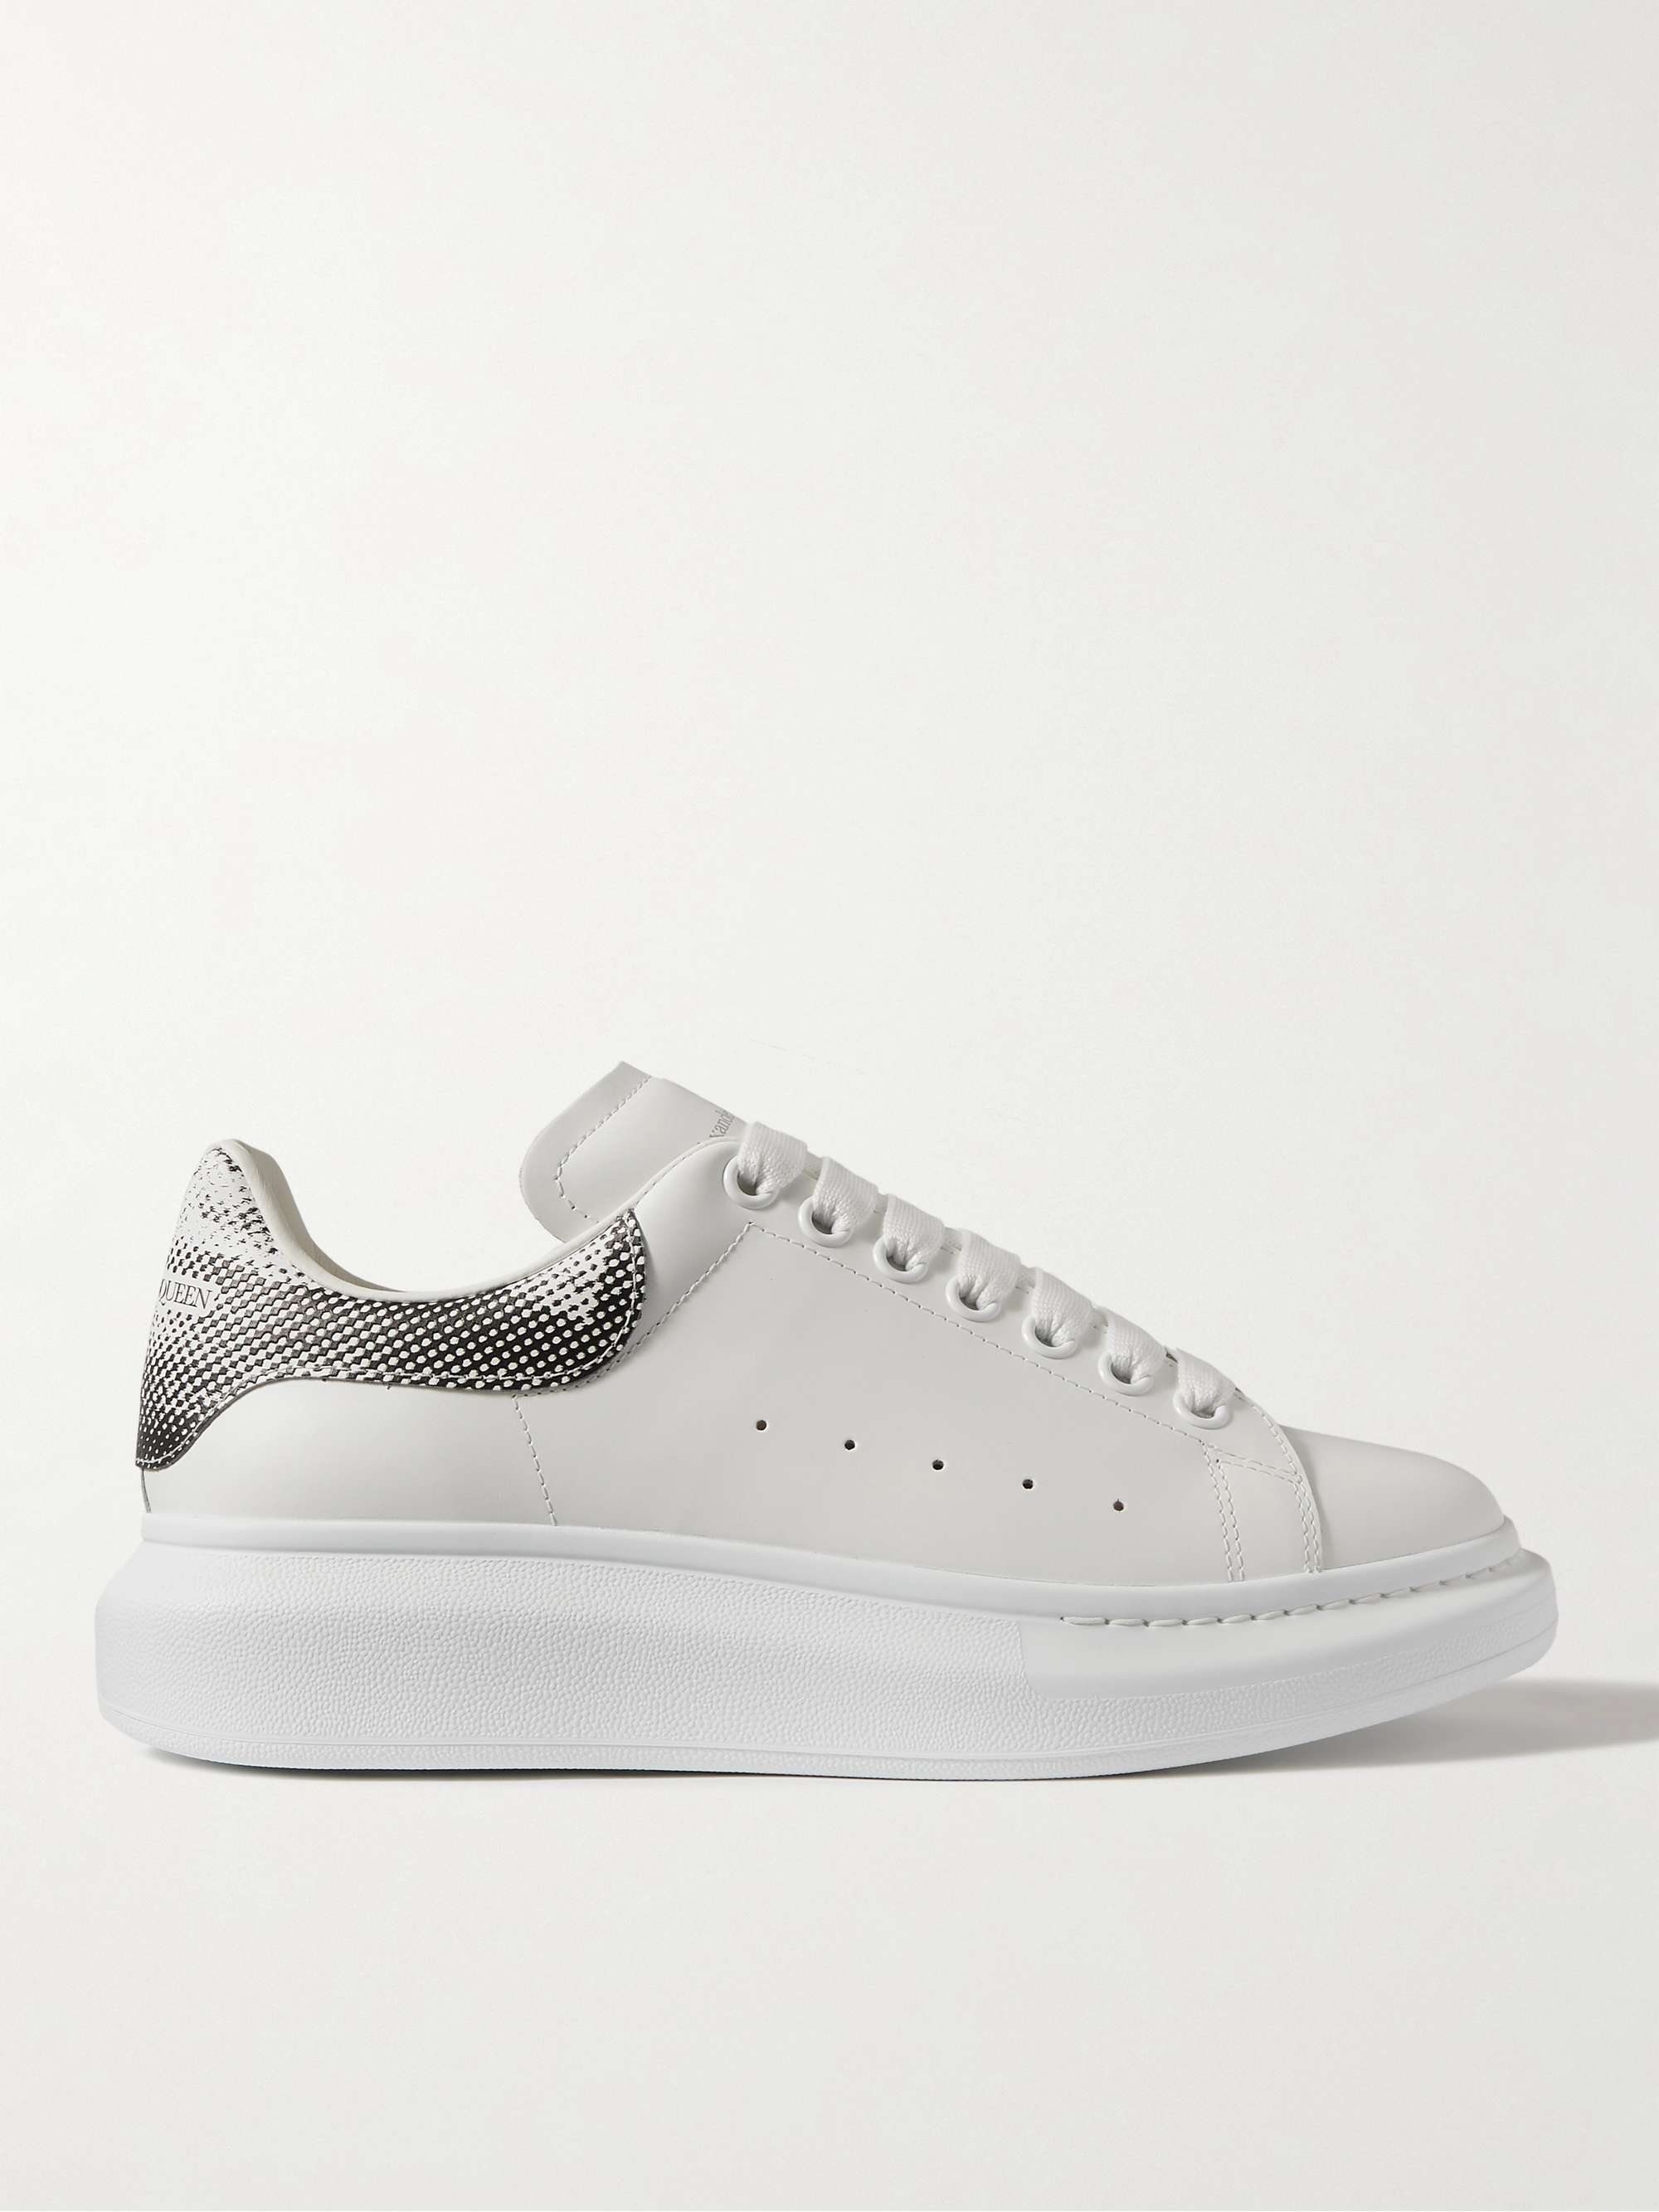 ALEXANDER MCQUEEN Printed Exaggerated-Sole Leather Sneakers